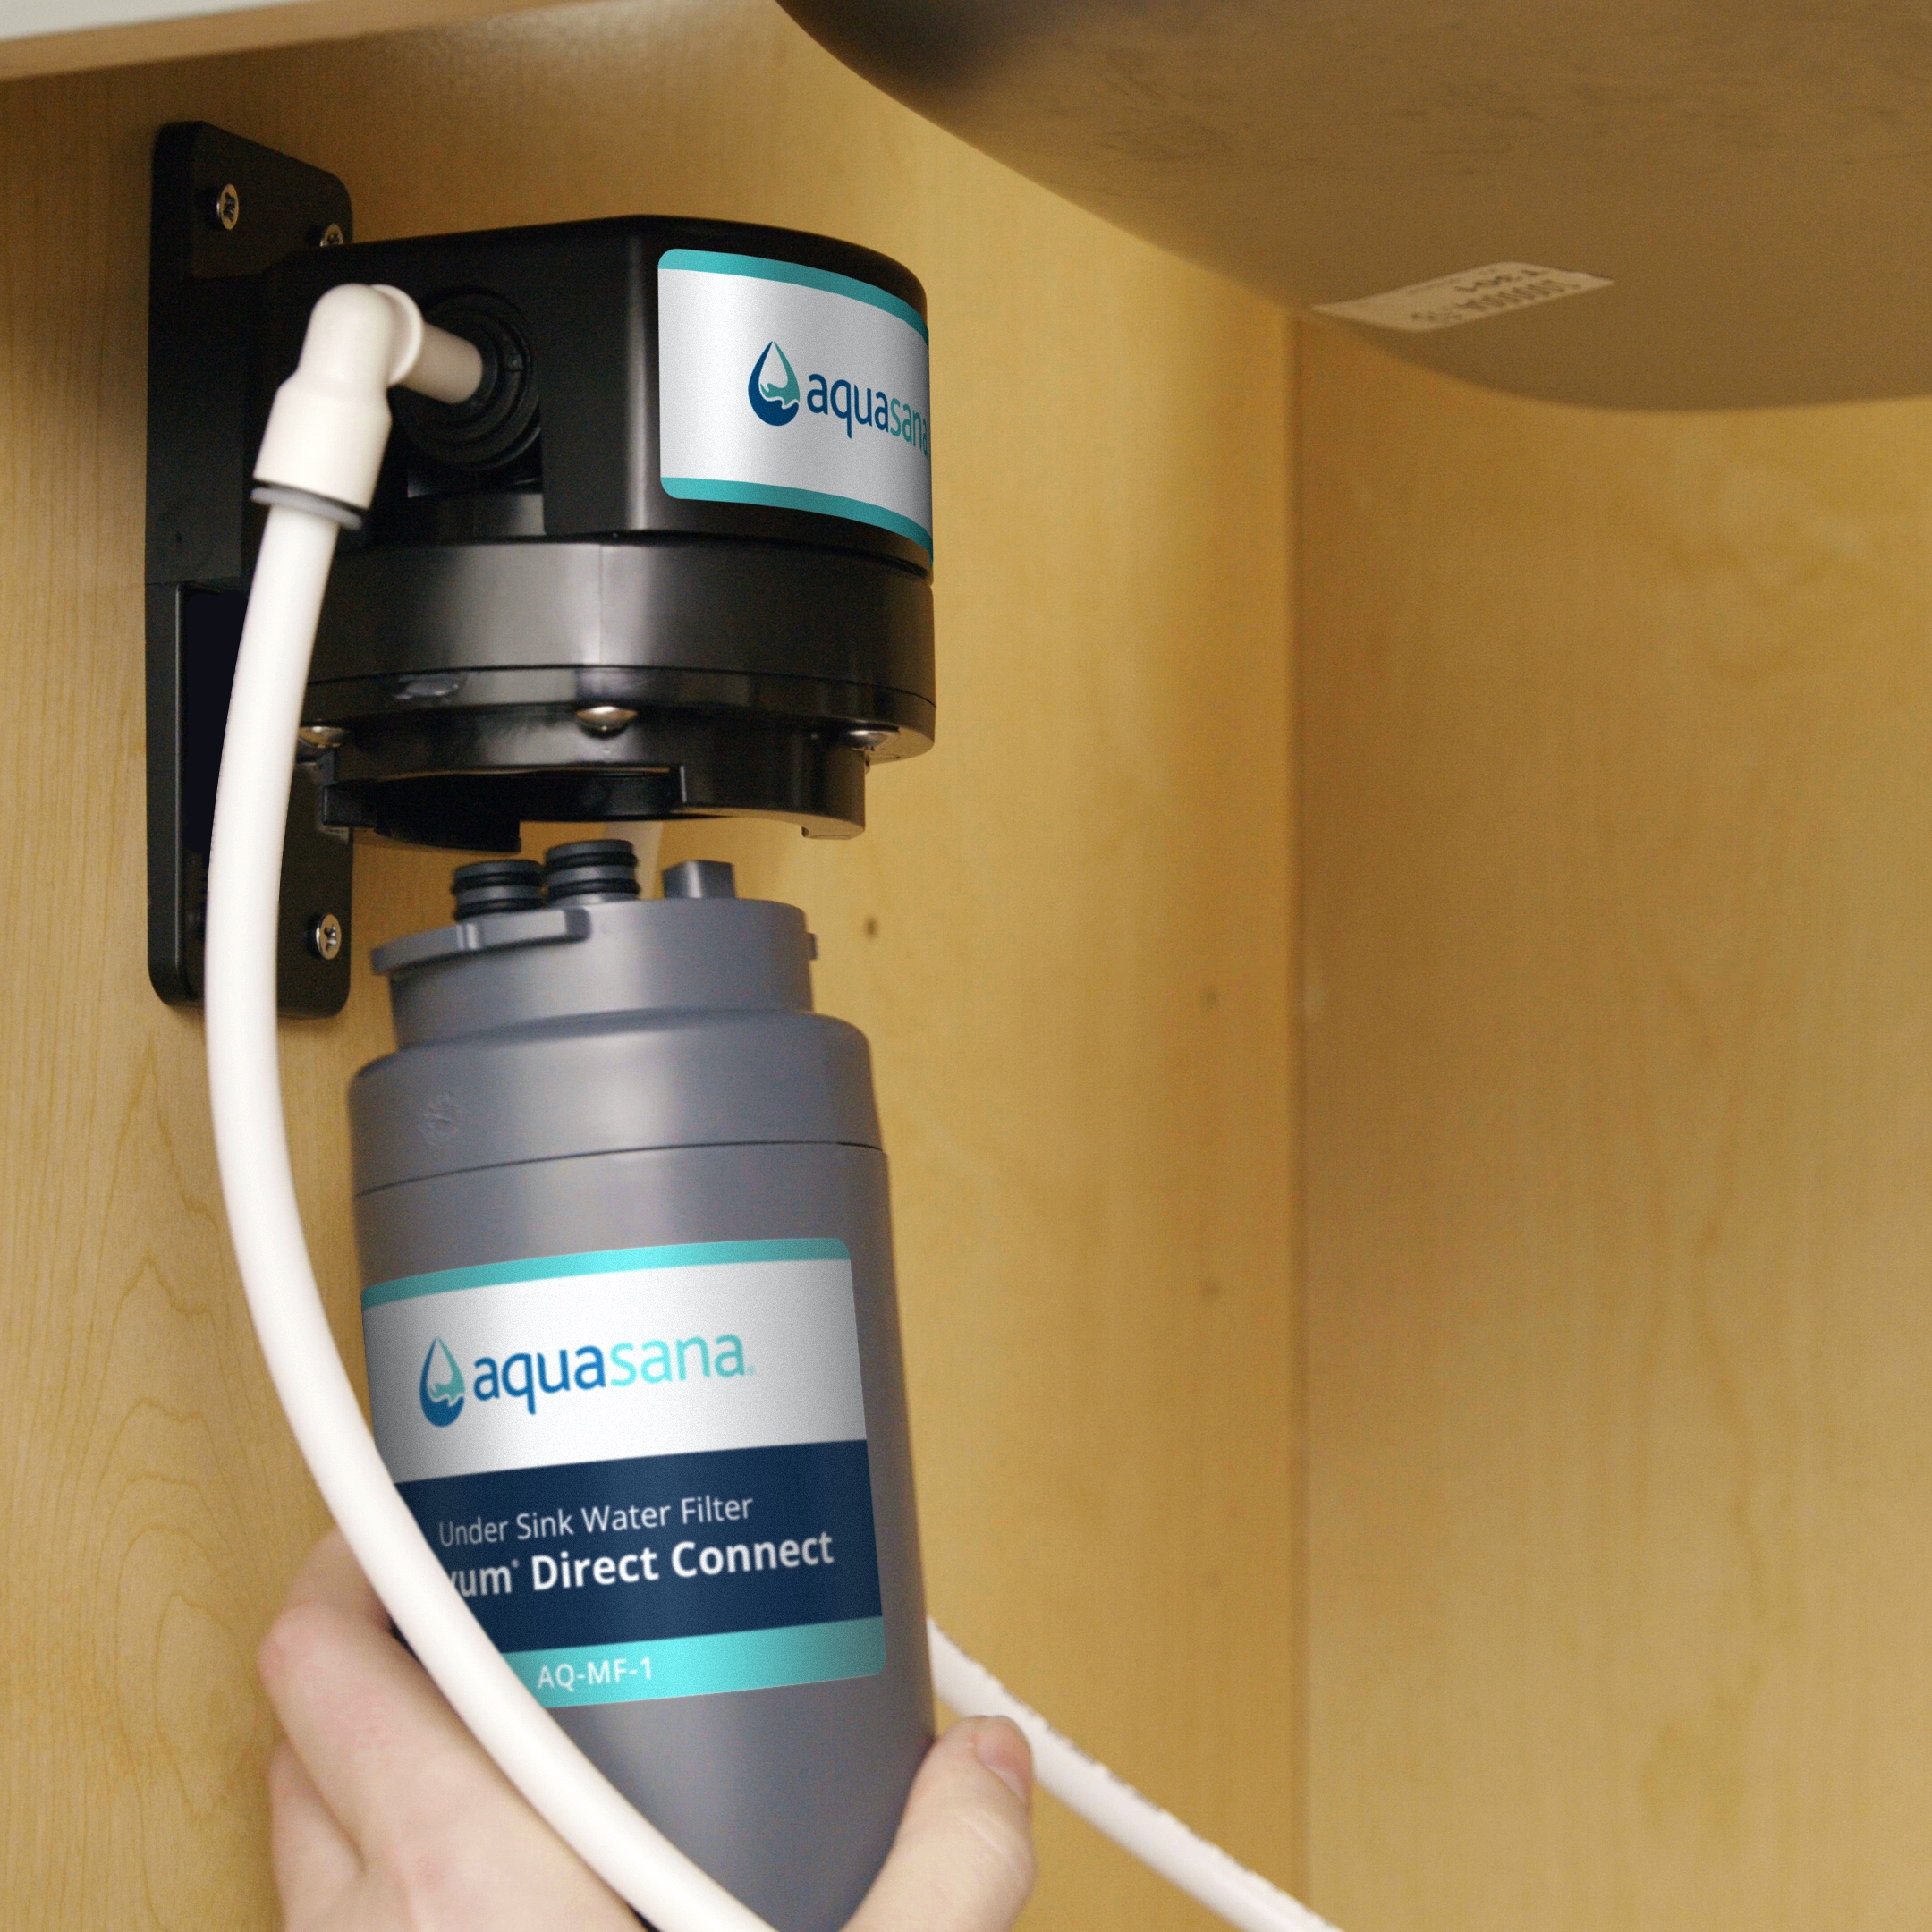 Aquasana Claryum Direct Connect Water Filtration System.